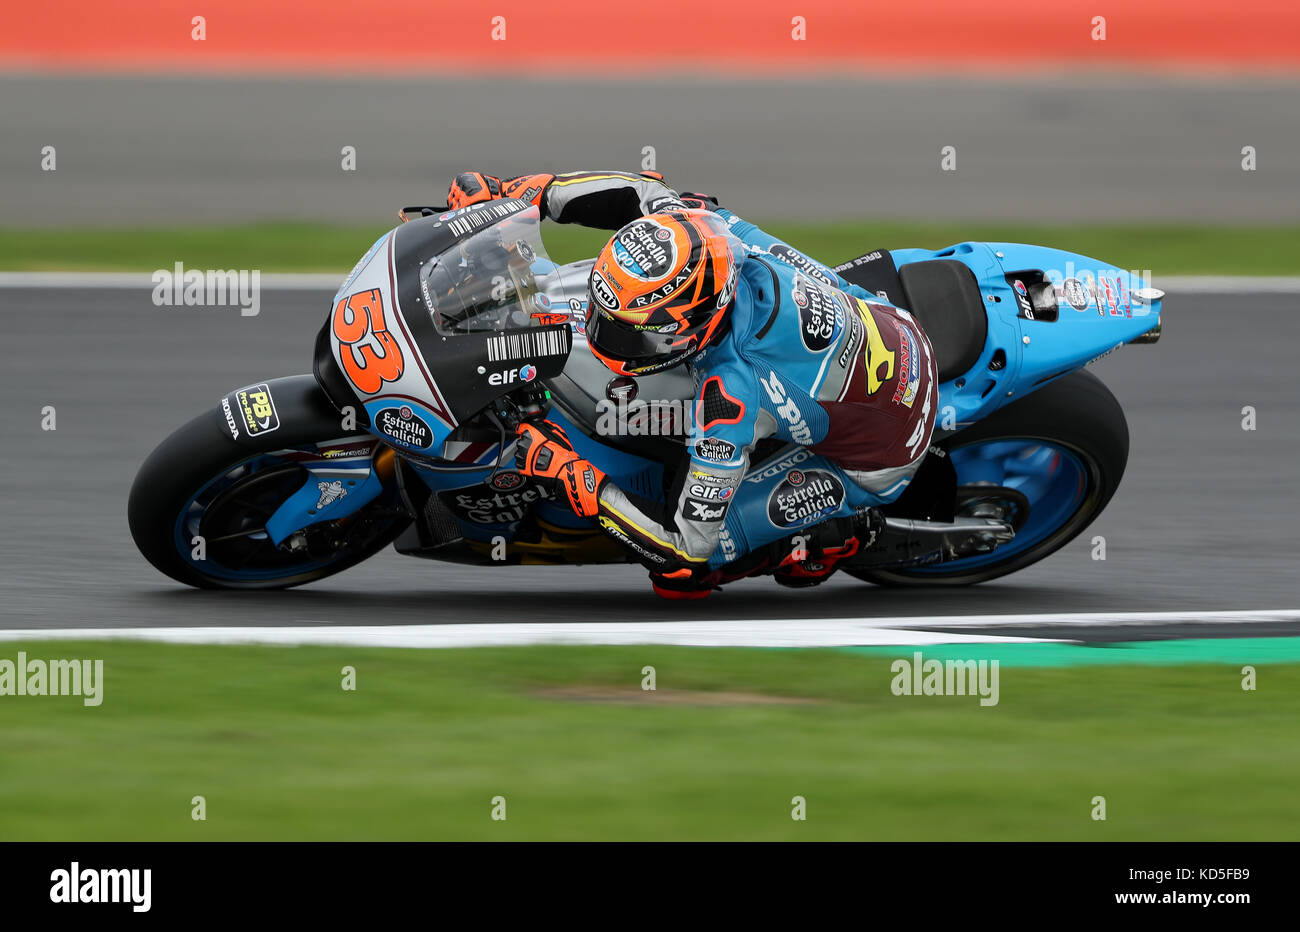 EG 0,0 Marc VDS Tito Rabat during qualifying ahead of the British Moto Grand Prix at Silverstone, Towcester. Stock Photo